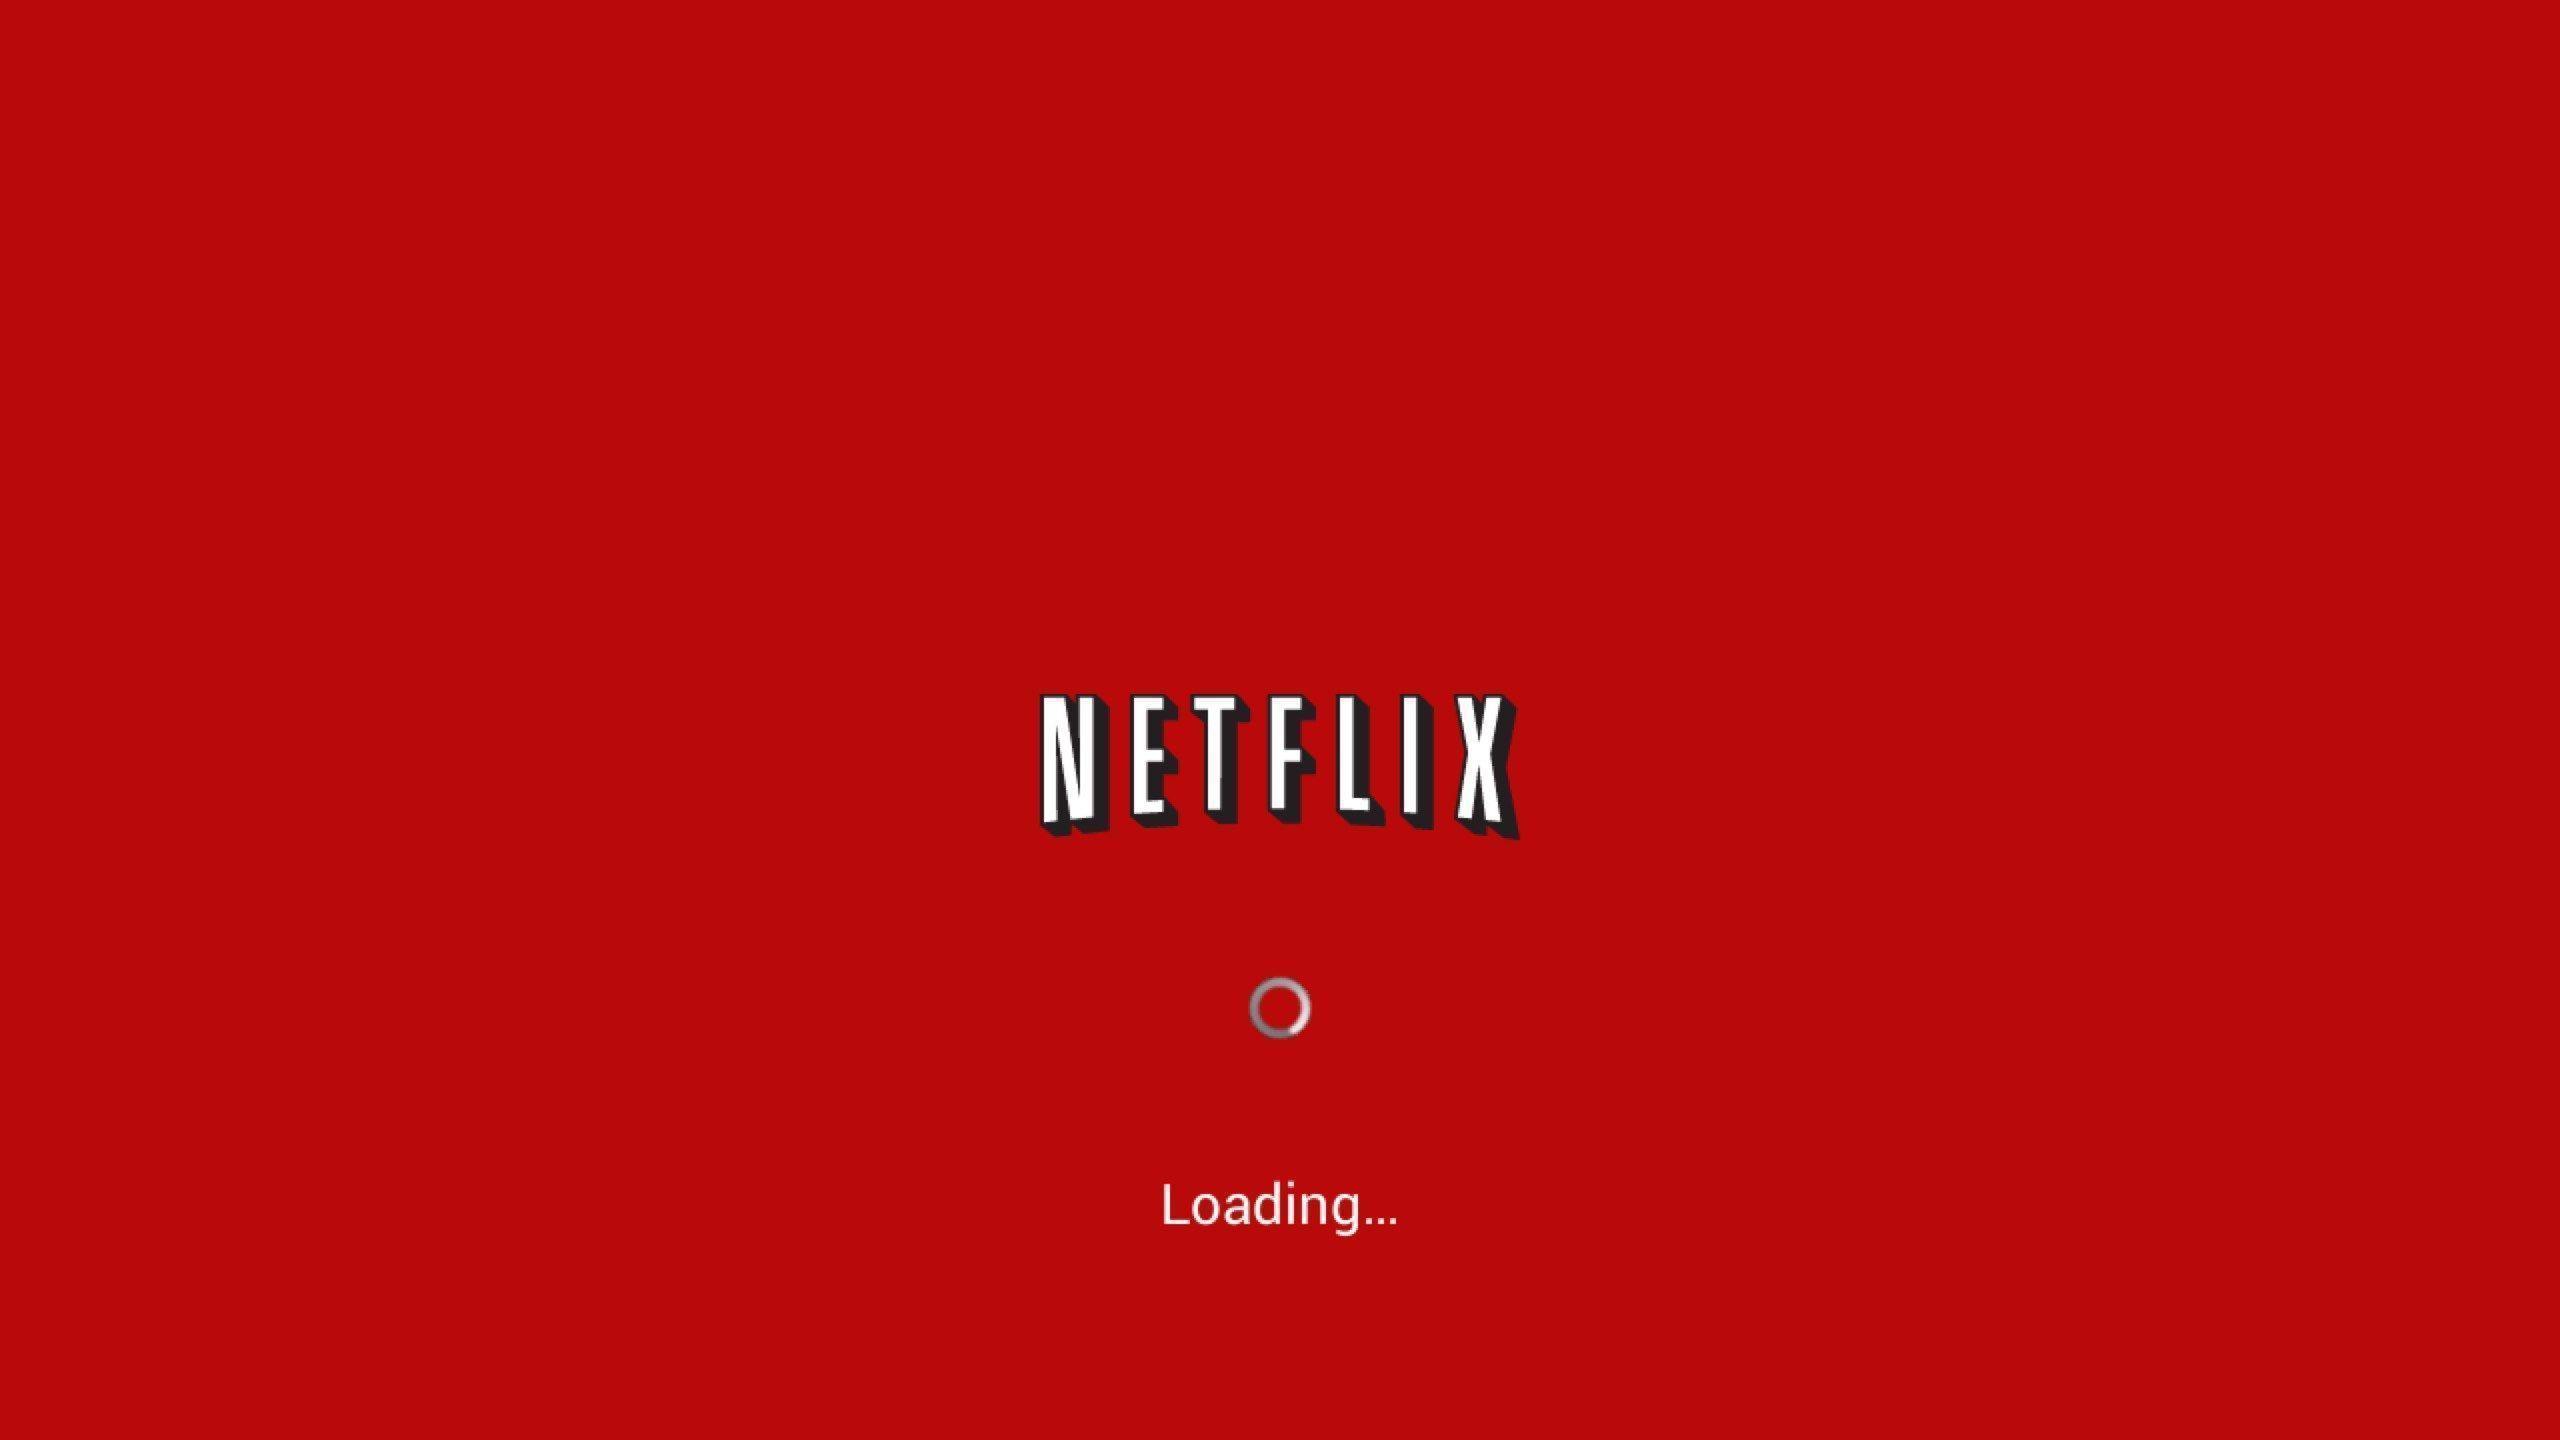 Cool Netflix Photos and Pictures, Netflix HQ Definition Wallpapers